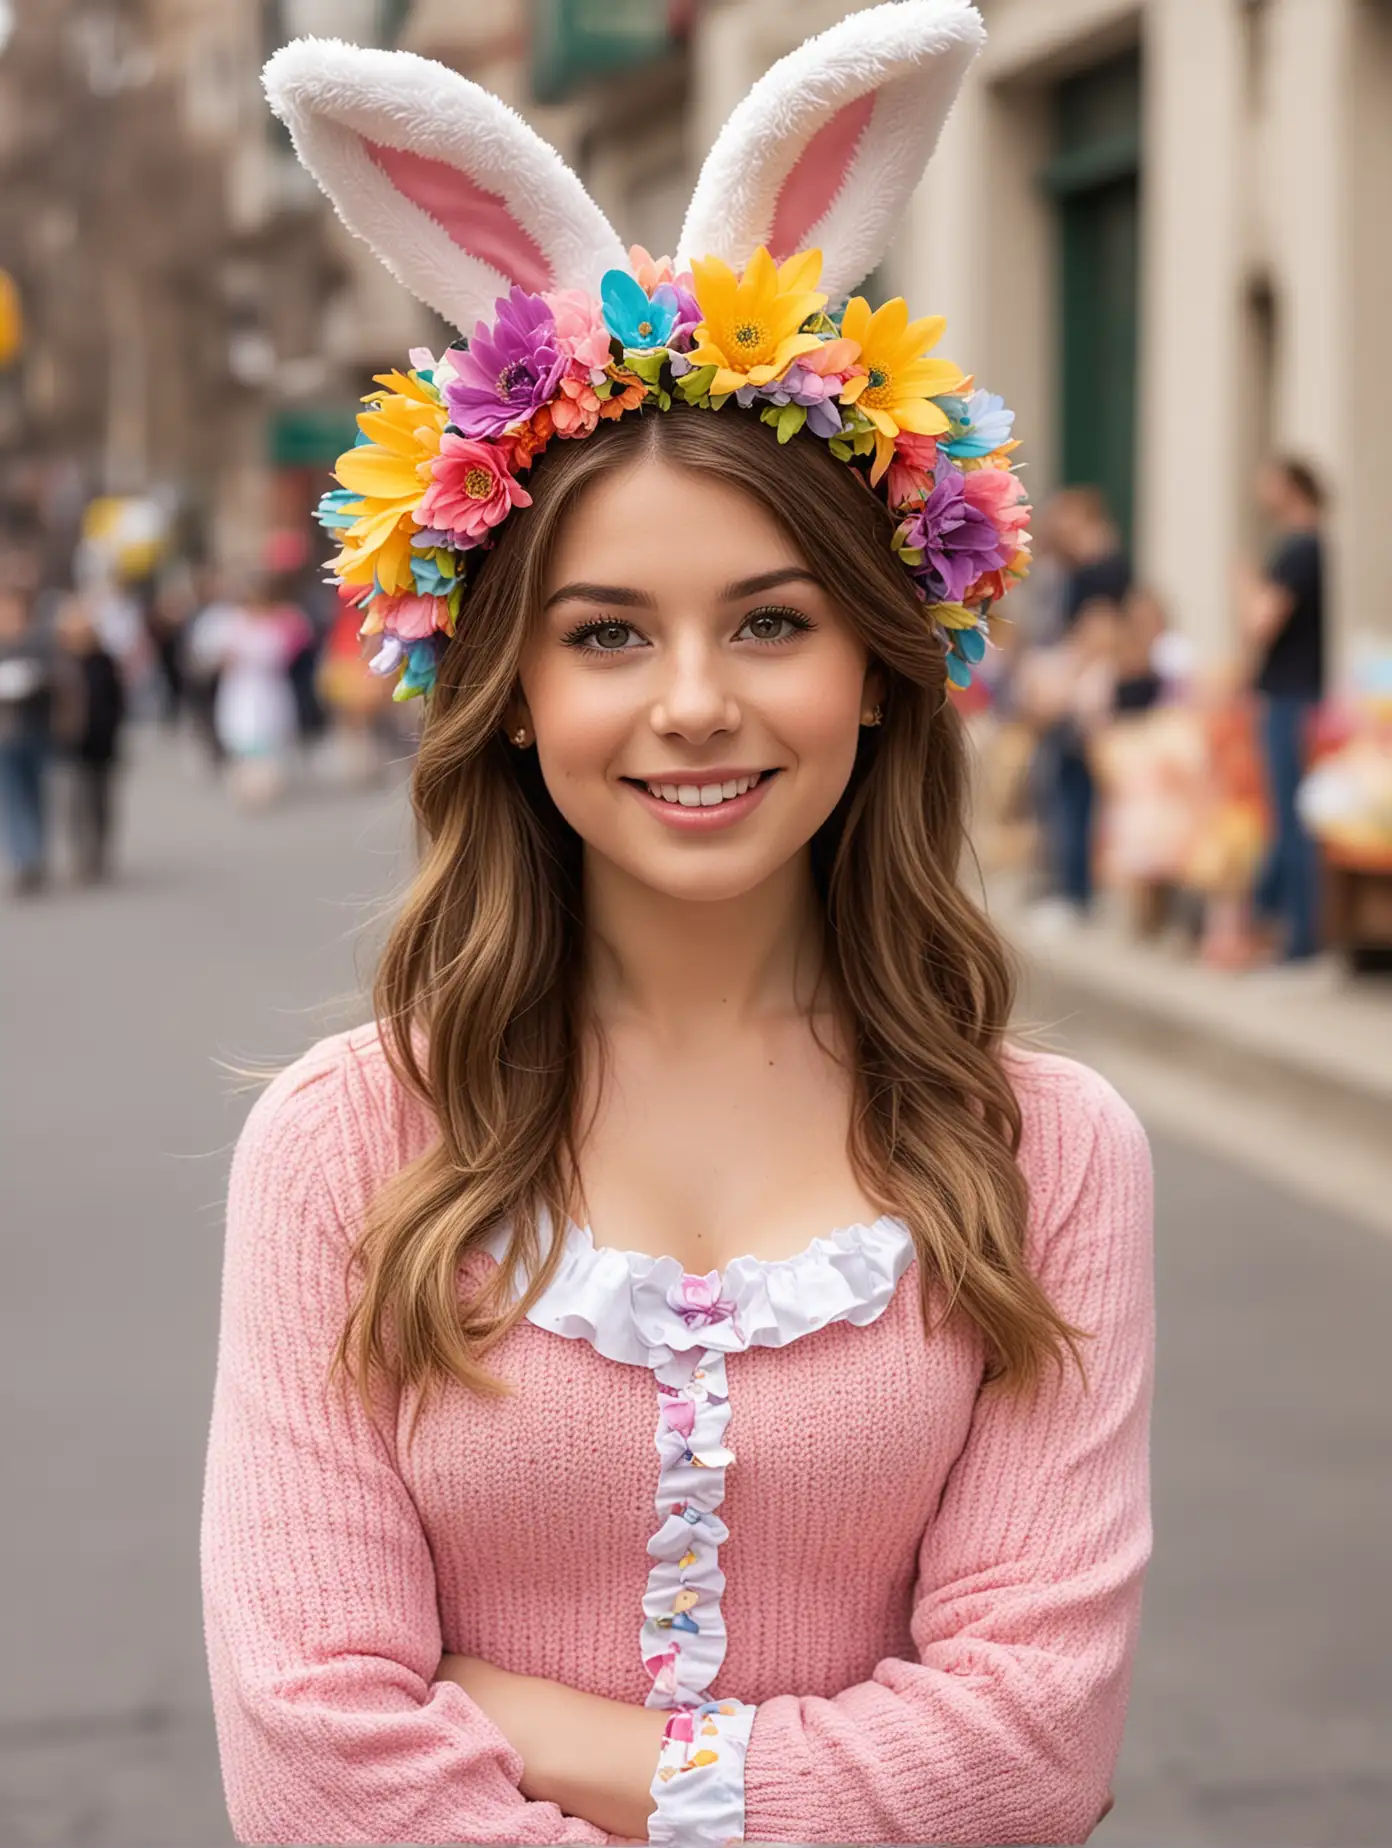 26-year-old American girl celebrates Easter, performance costume, bunny elements, creative flower hat, colorful, Easter eggs, festive atmosphere, full of festive atmosphere, captured at the Easter parade, facing the camera, exquisite facial features, professional photography technology ,Full body image